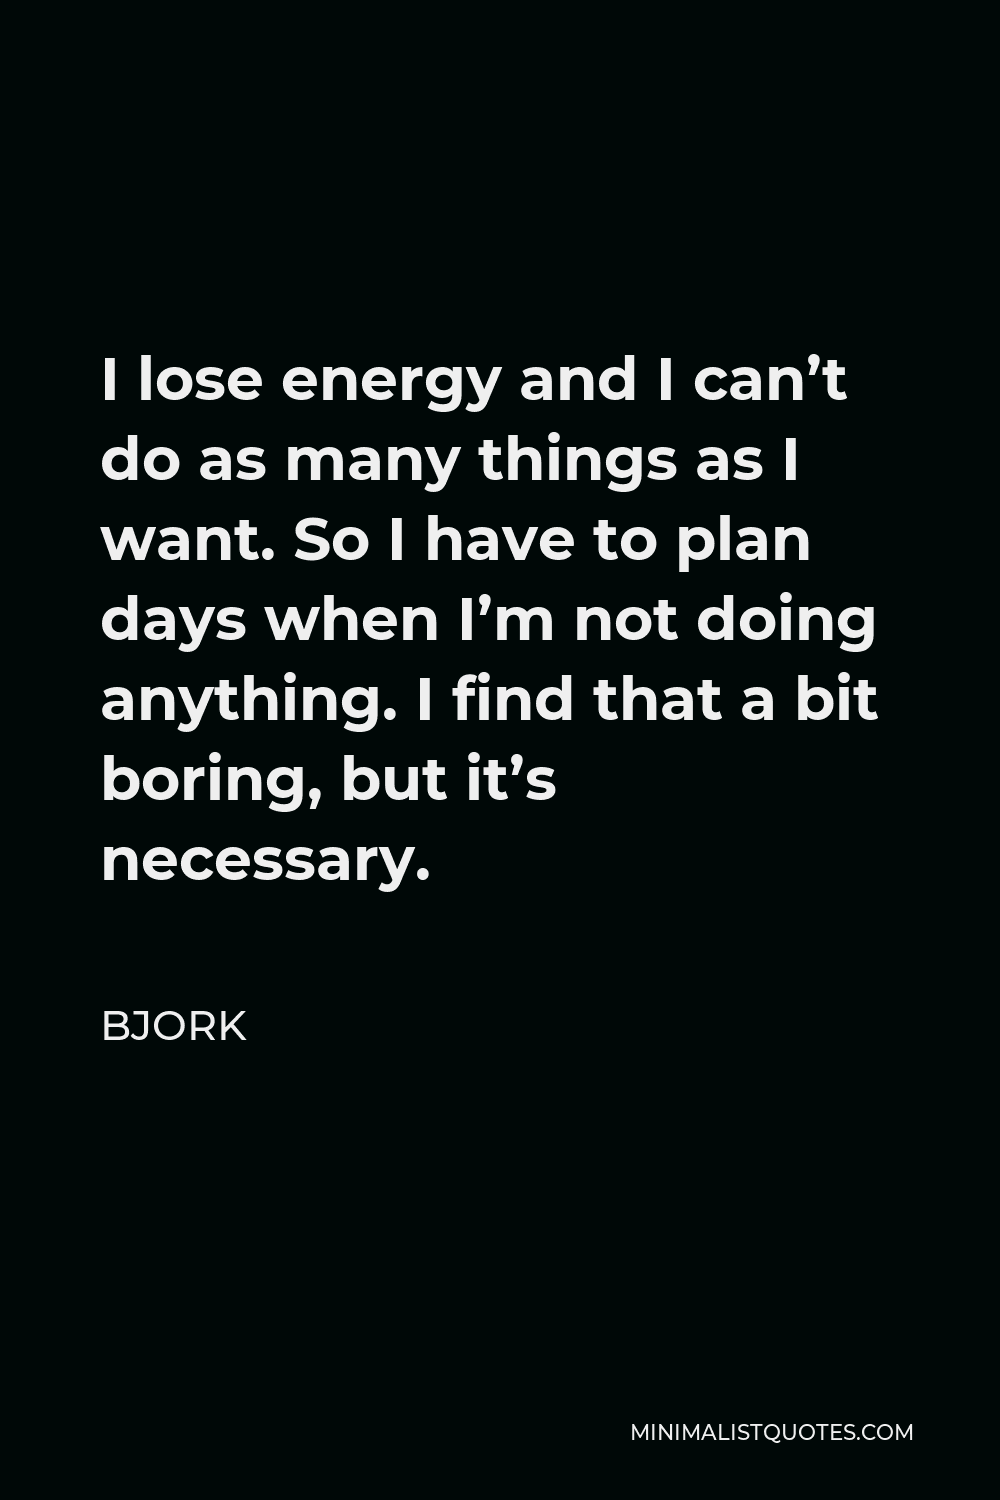 Bjork Quote - I lose energy and I can’t do as many things as I want. So I have to plan days when I’m not doing anything. I find that a bit boring, but it’s necessary.